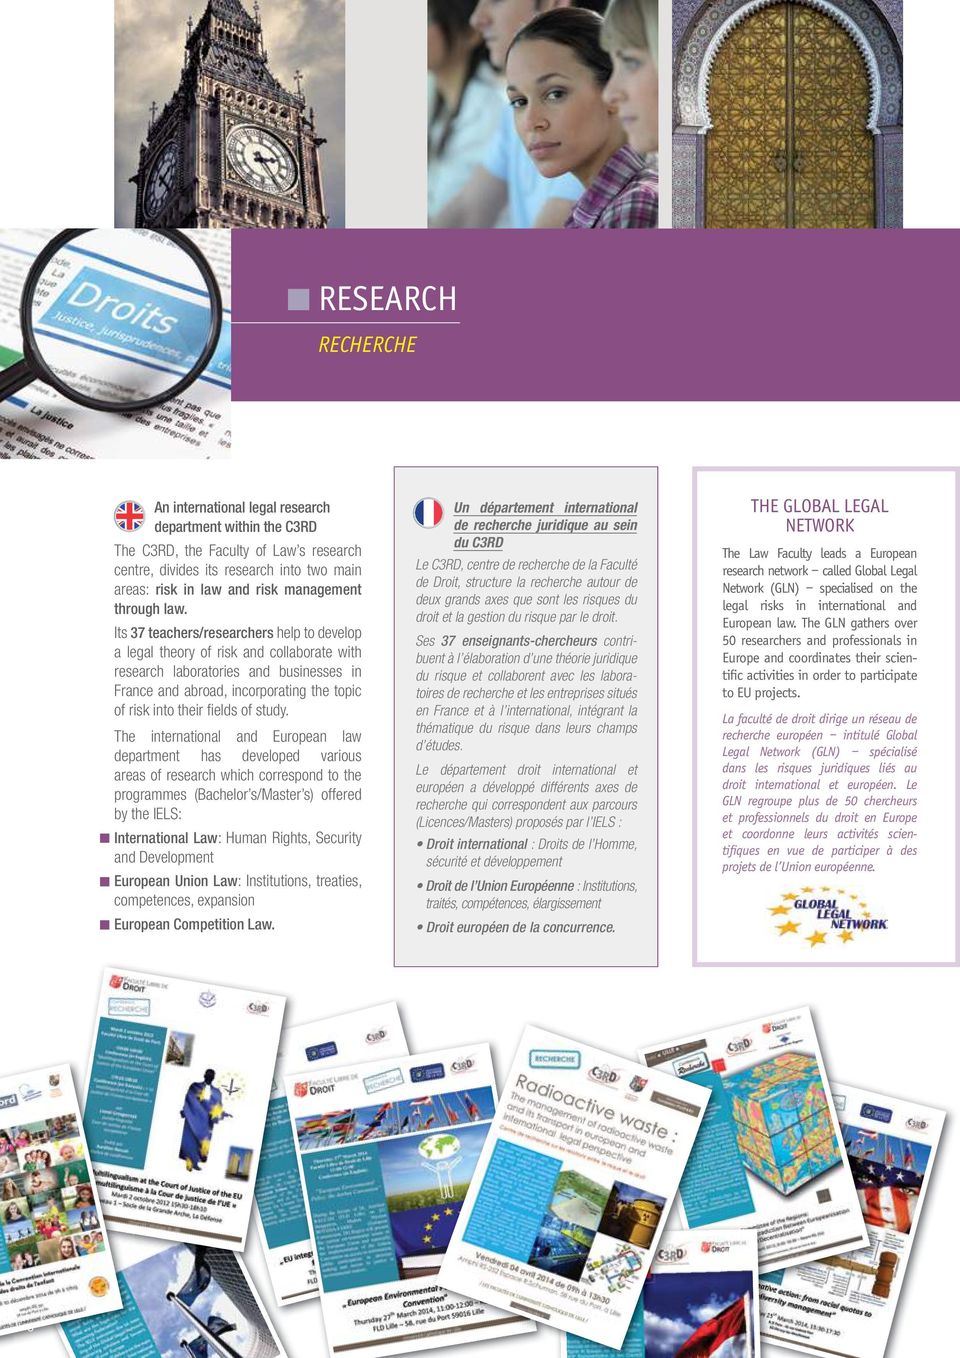 Its 37 teachers/researchers help to develop a legal theory of risk and collaborate with research laboratories and businesses in France and abroad, incorporating the topic of risk into their fi elds